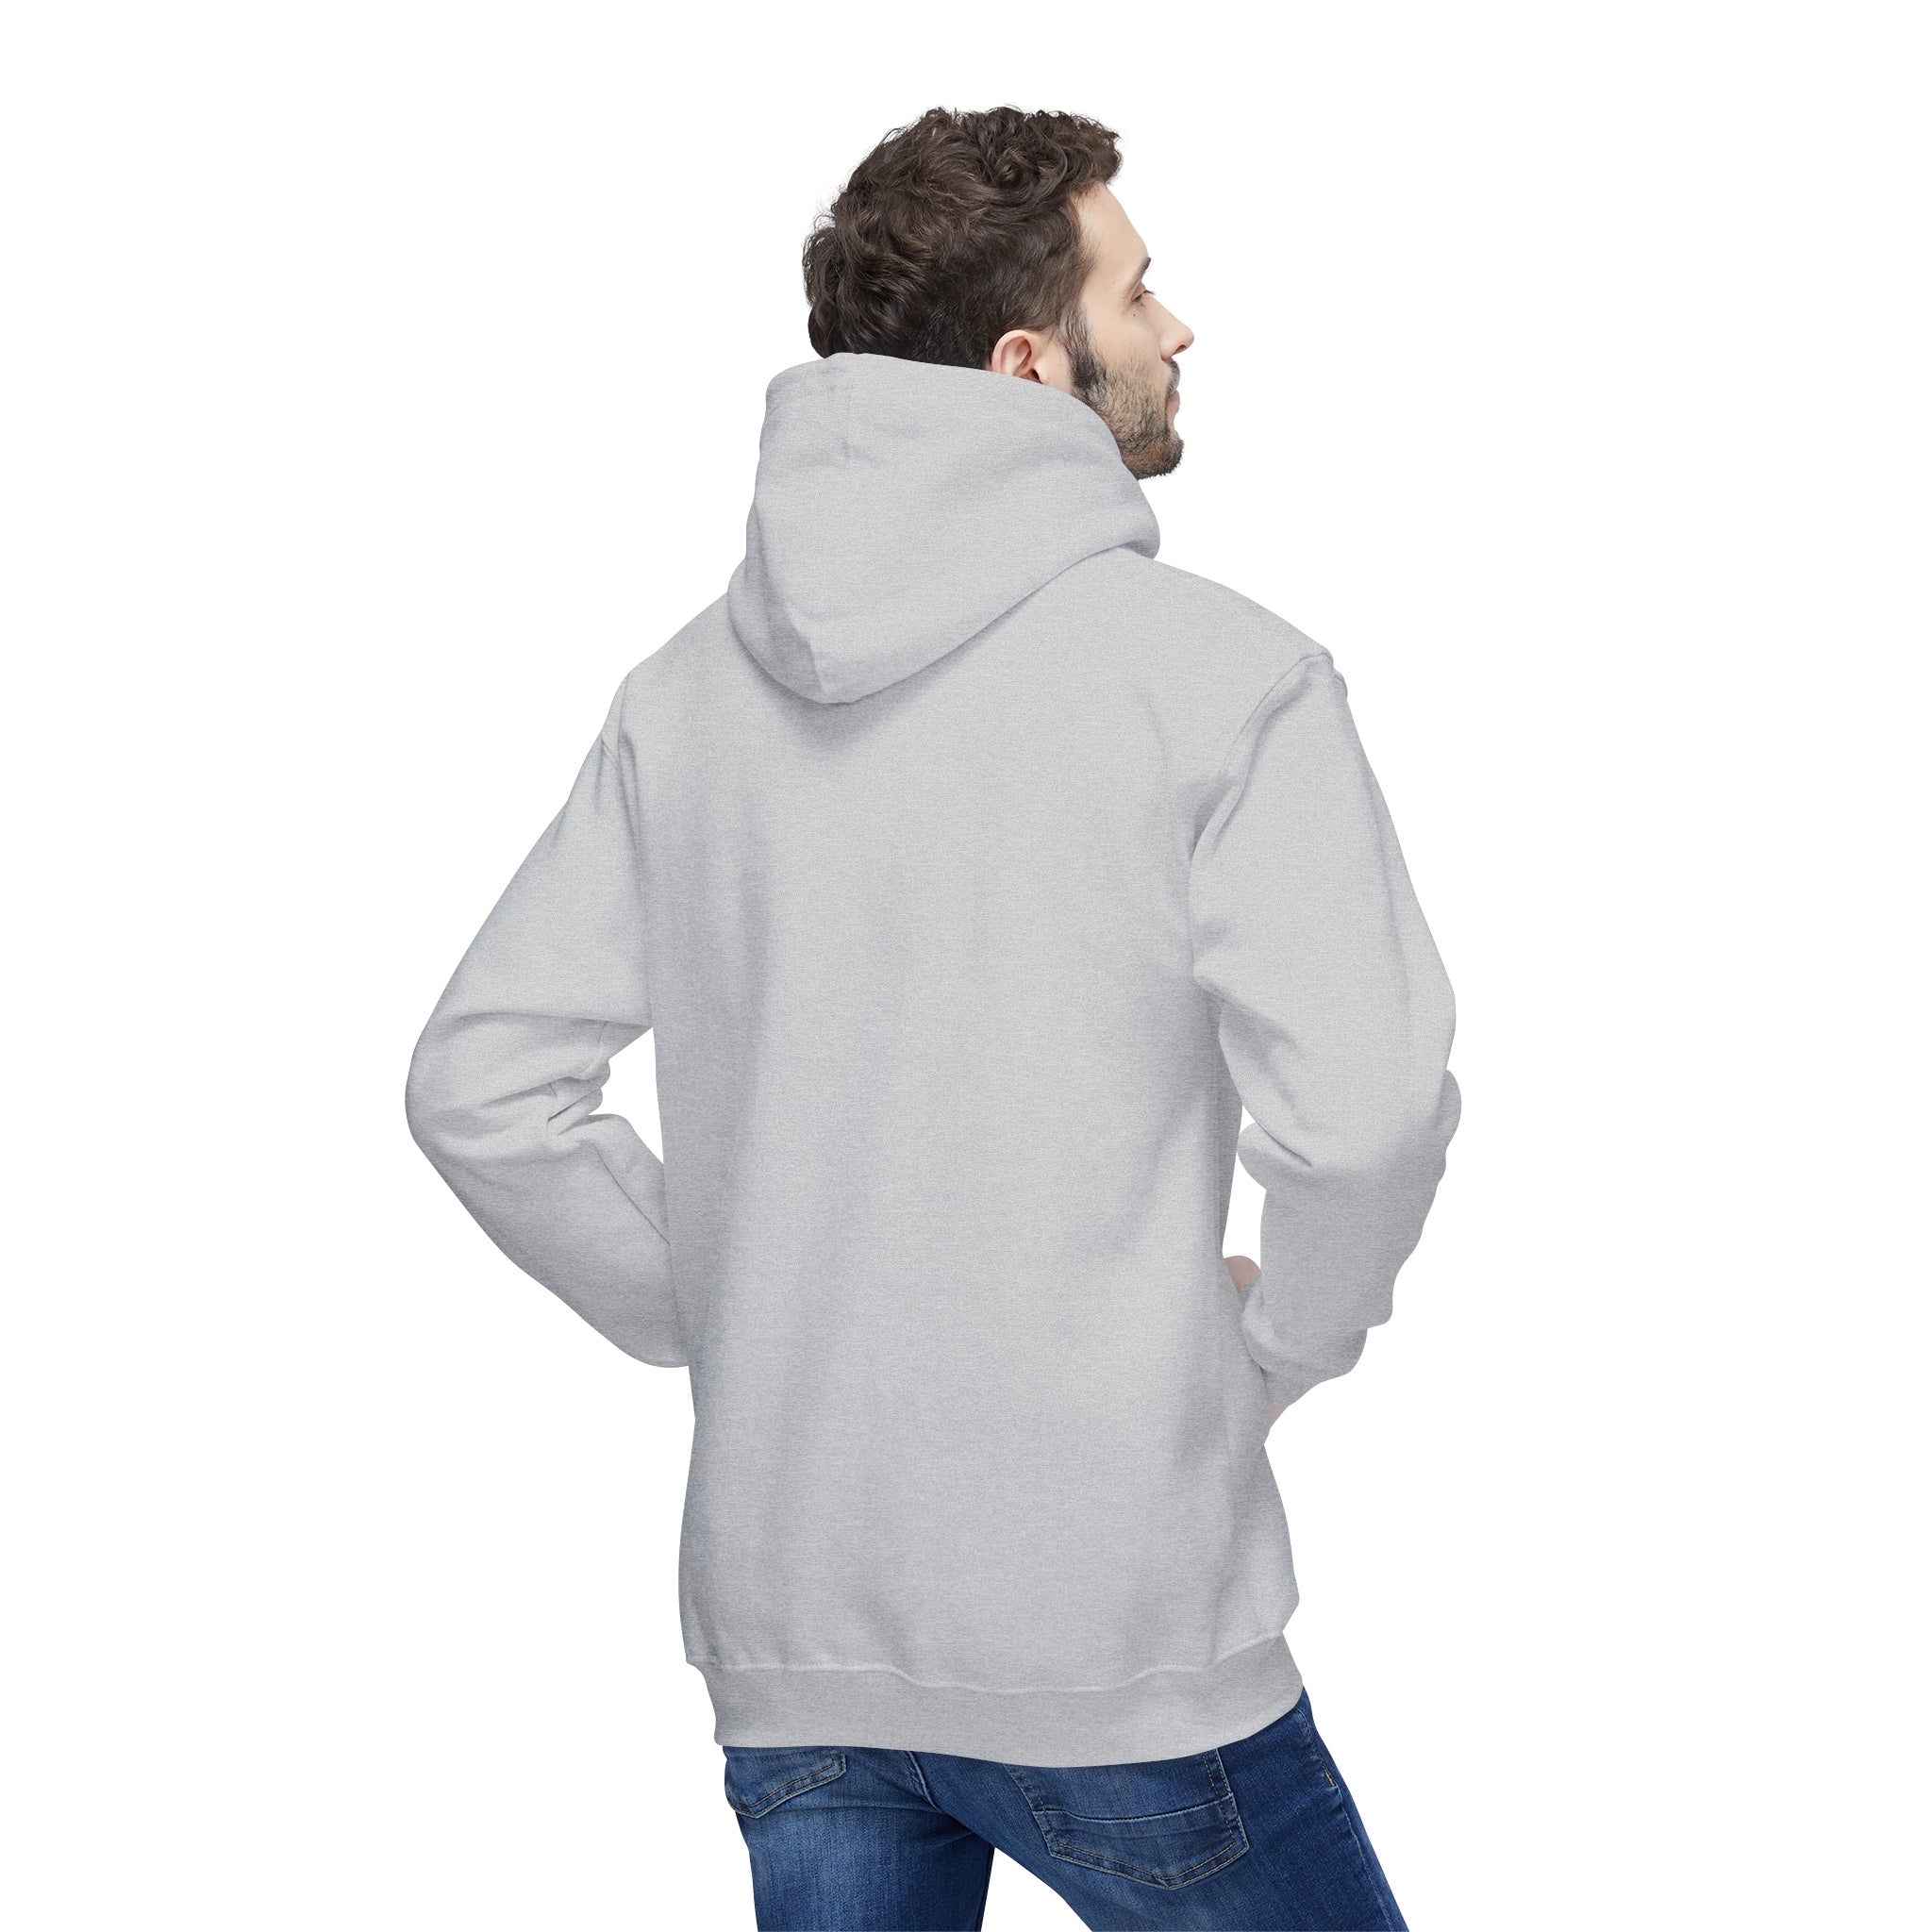 The Sports Hangover Hooded Sweatshirt, Made in US